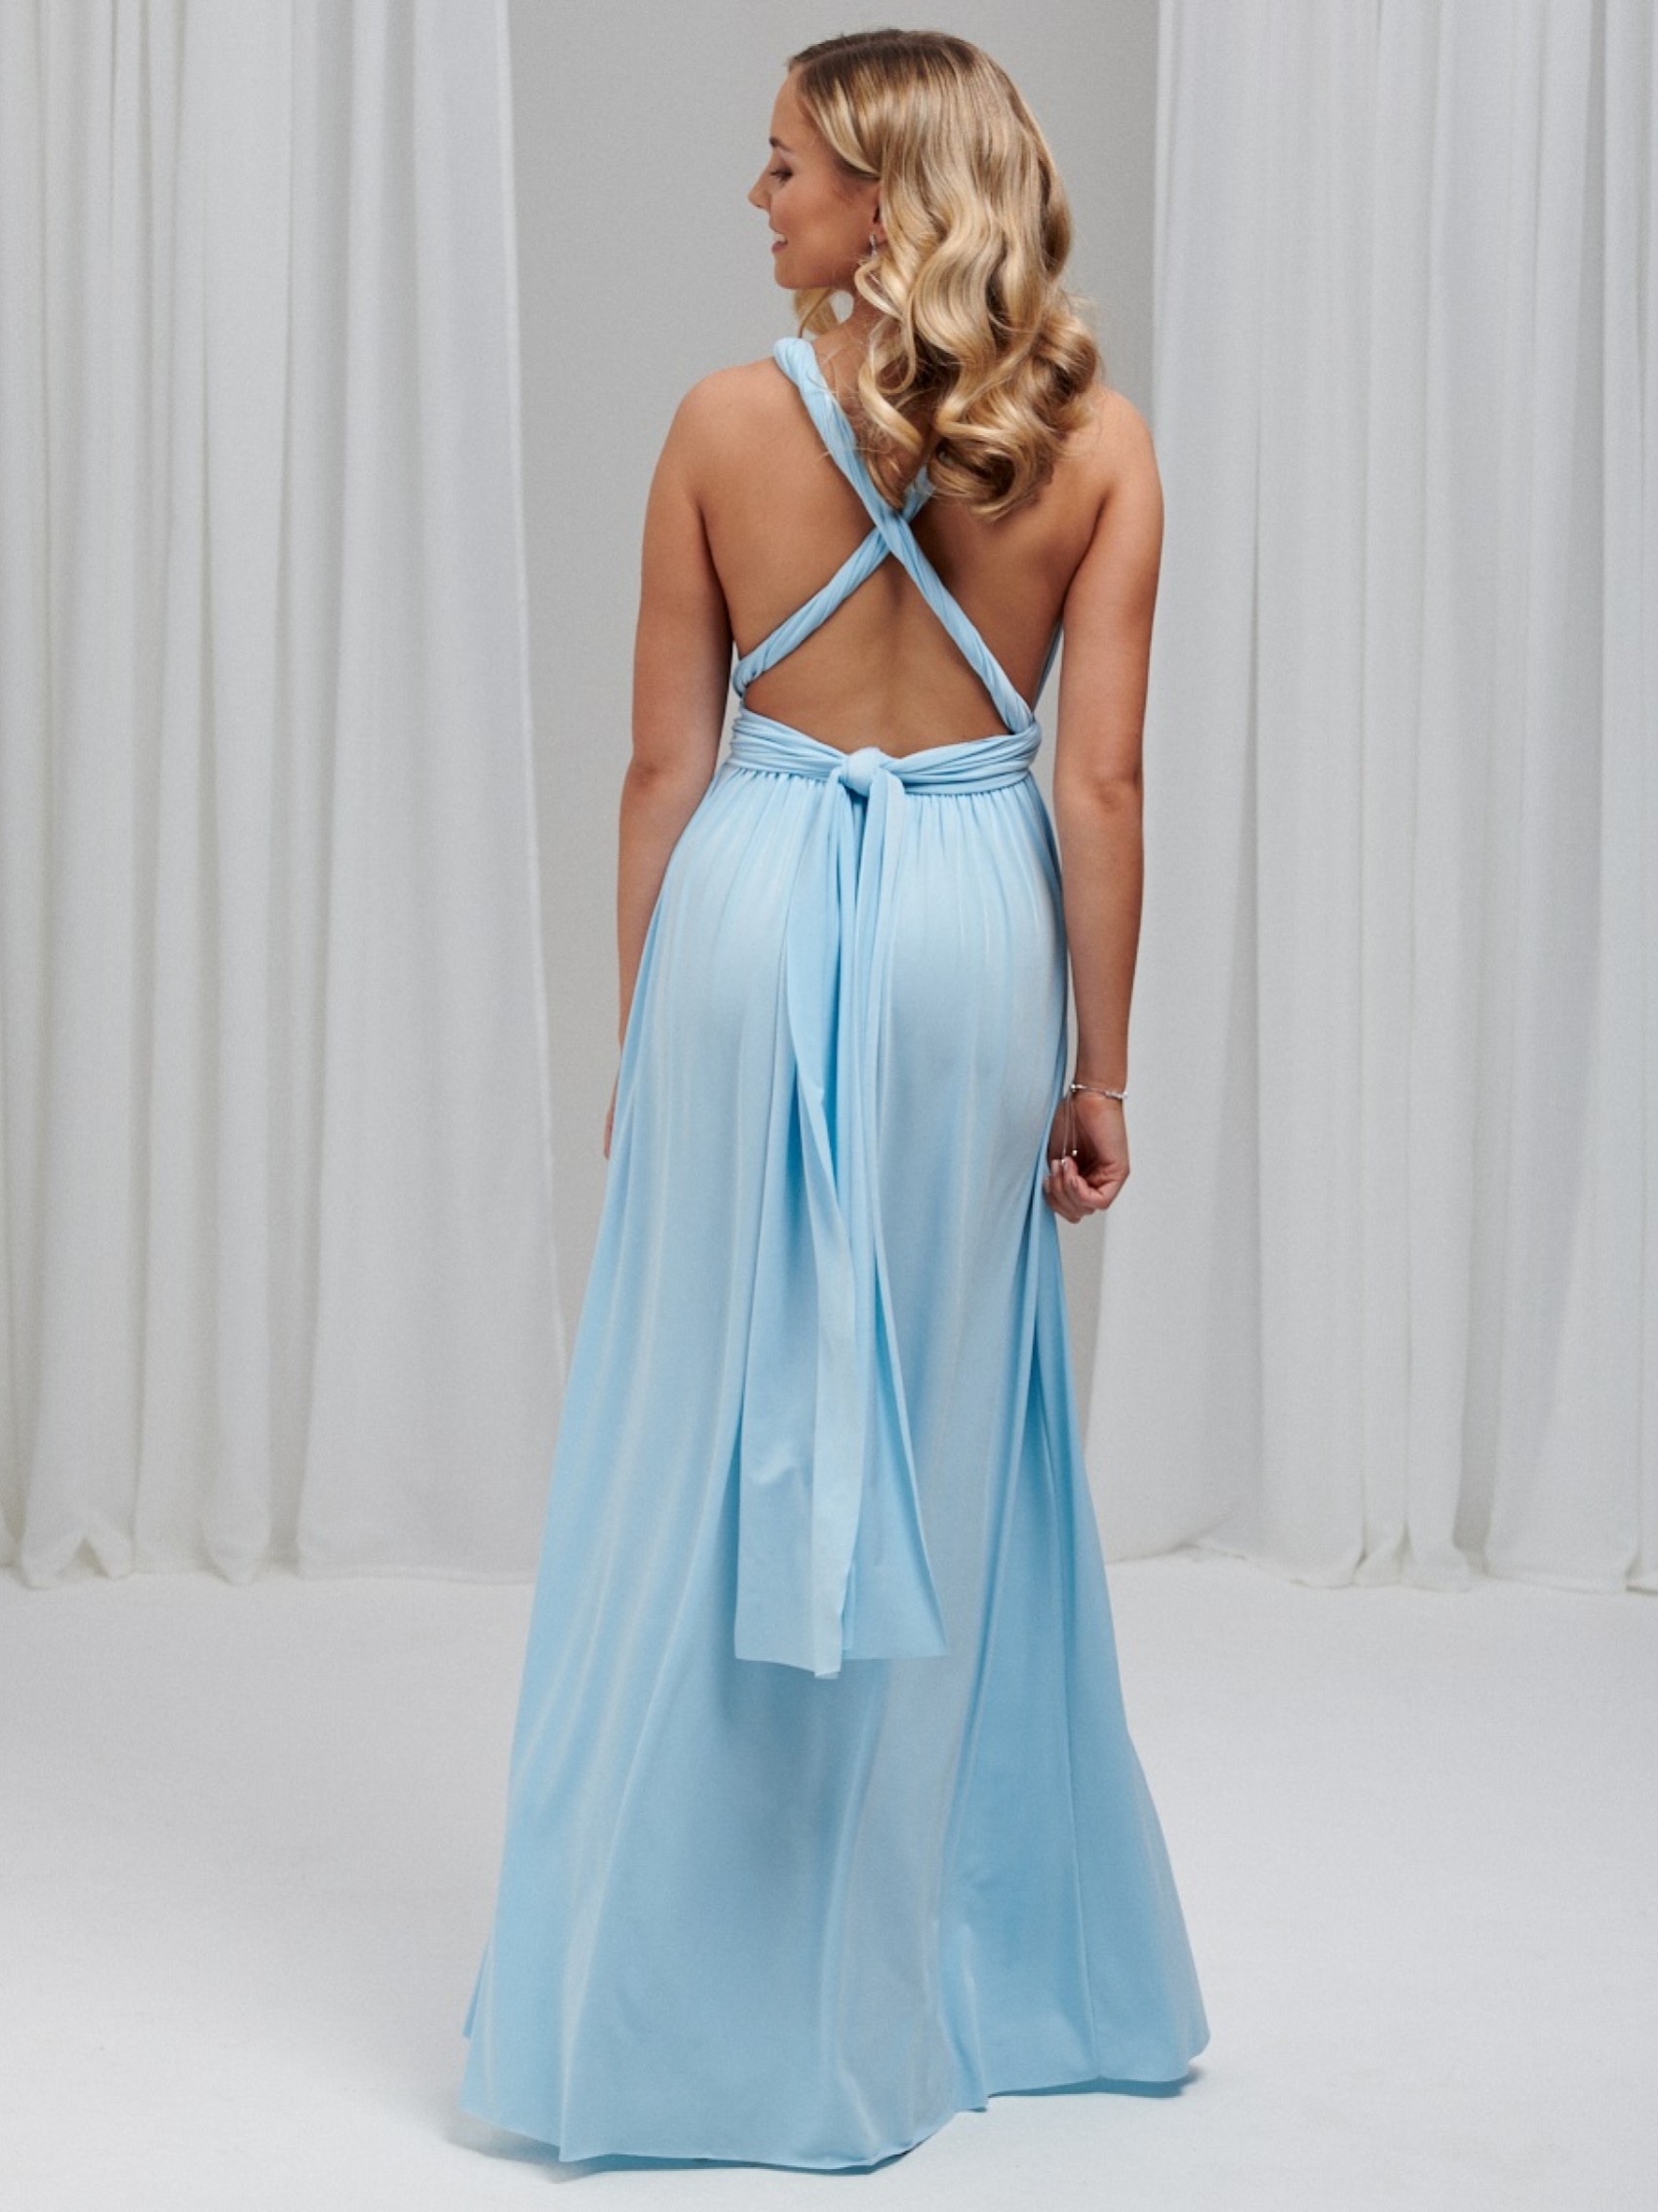 Classic Multiway Infinity Bridesmaid Dress In Powder Blue - Formal Dresses  For Sale